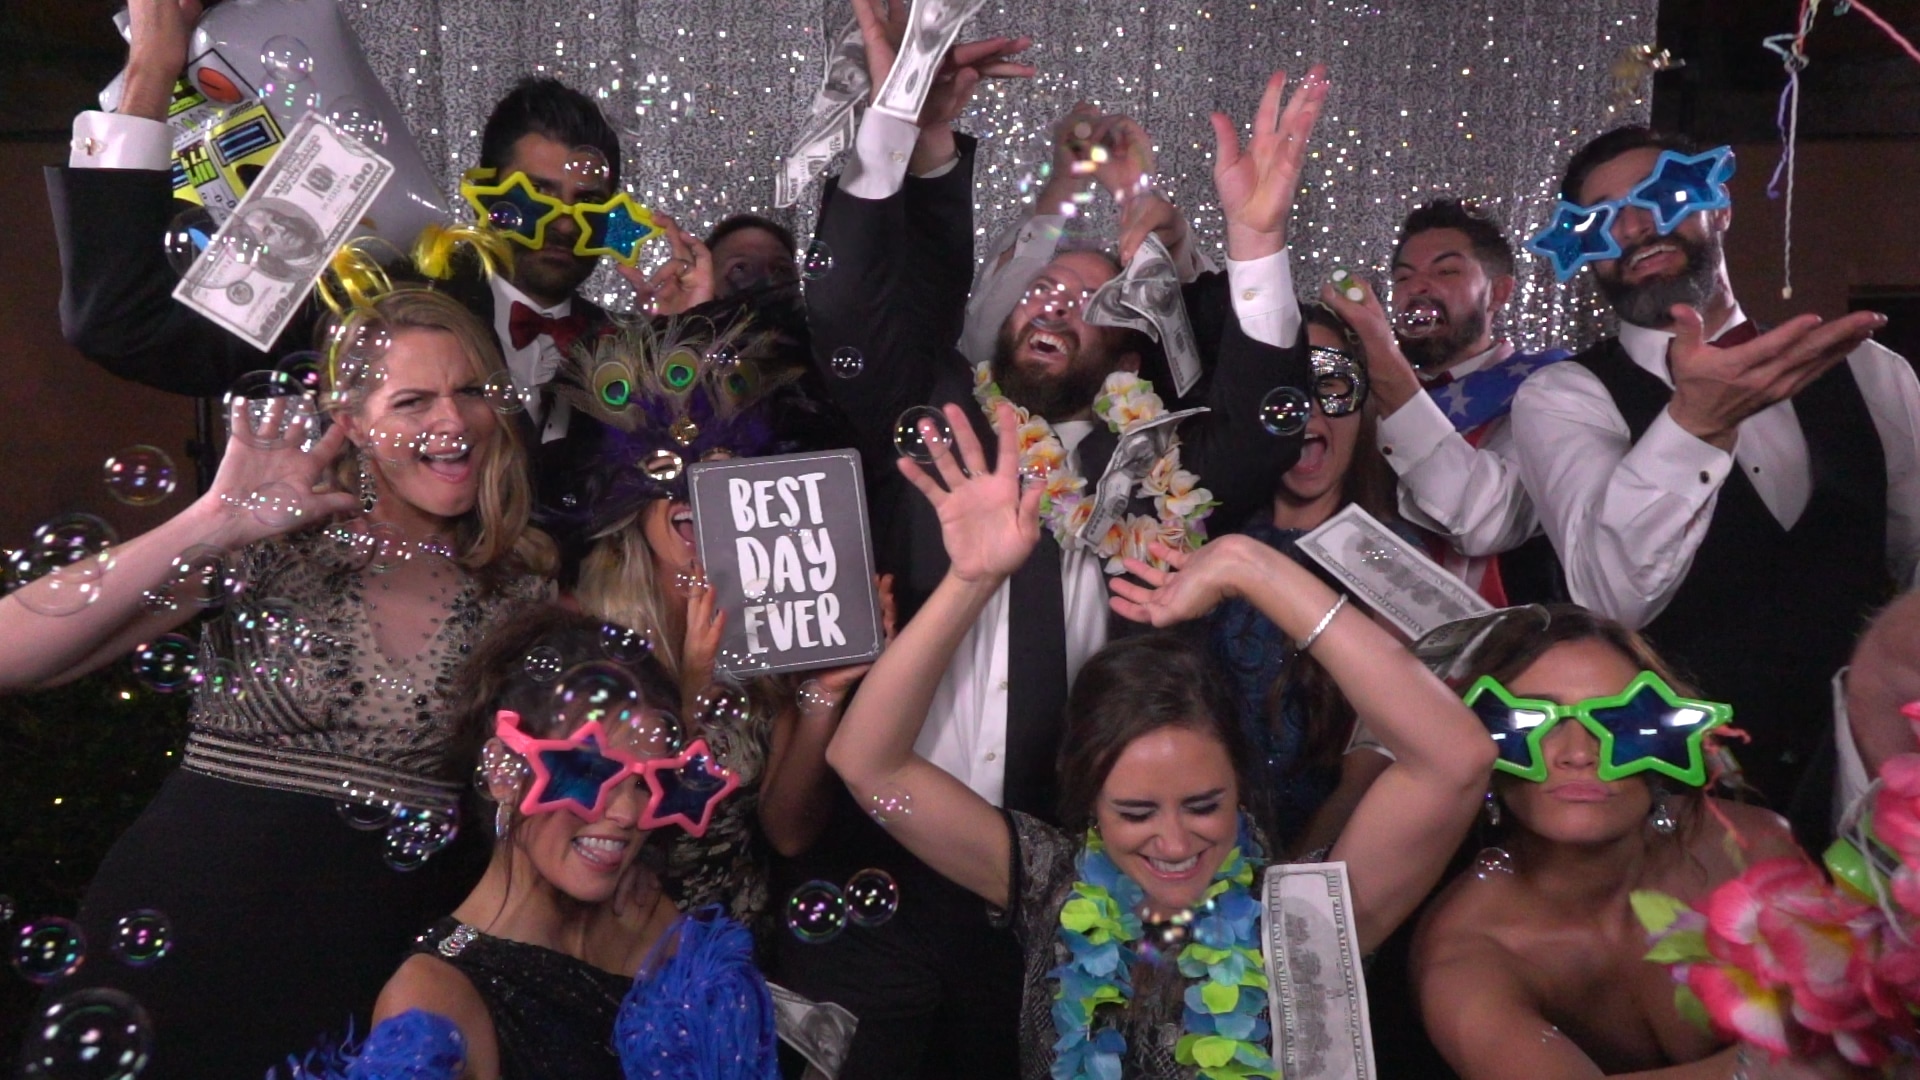 Omarvelous Productions - guests celebrating in photo booth with bubbles